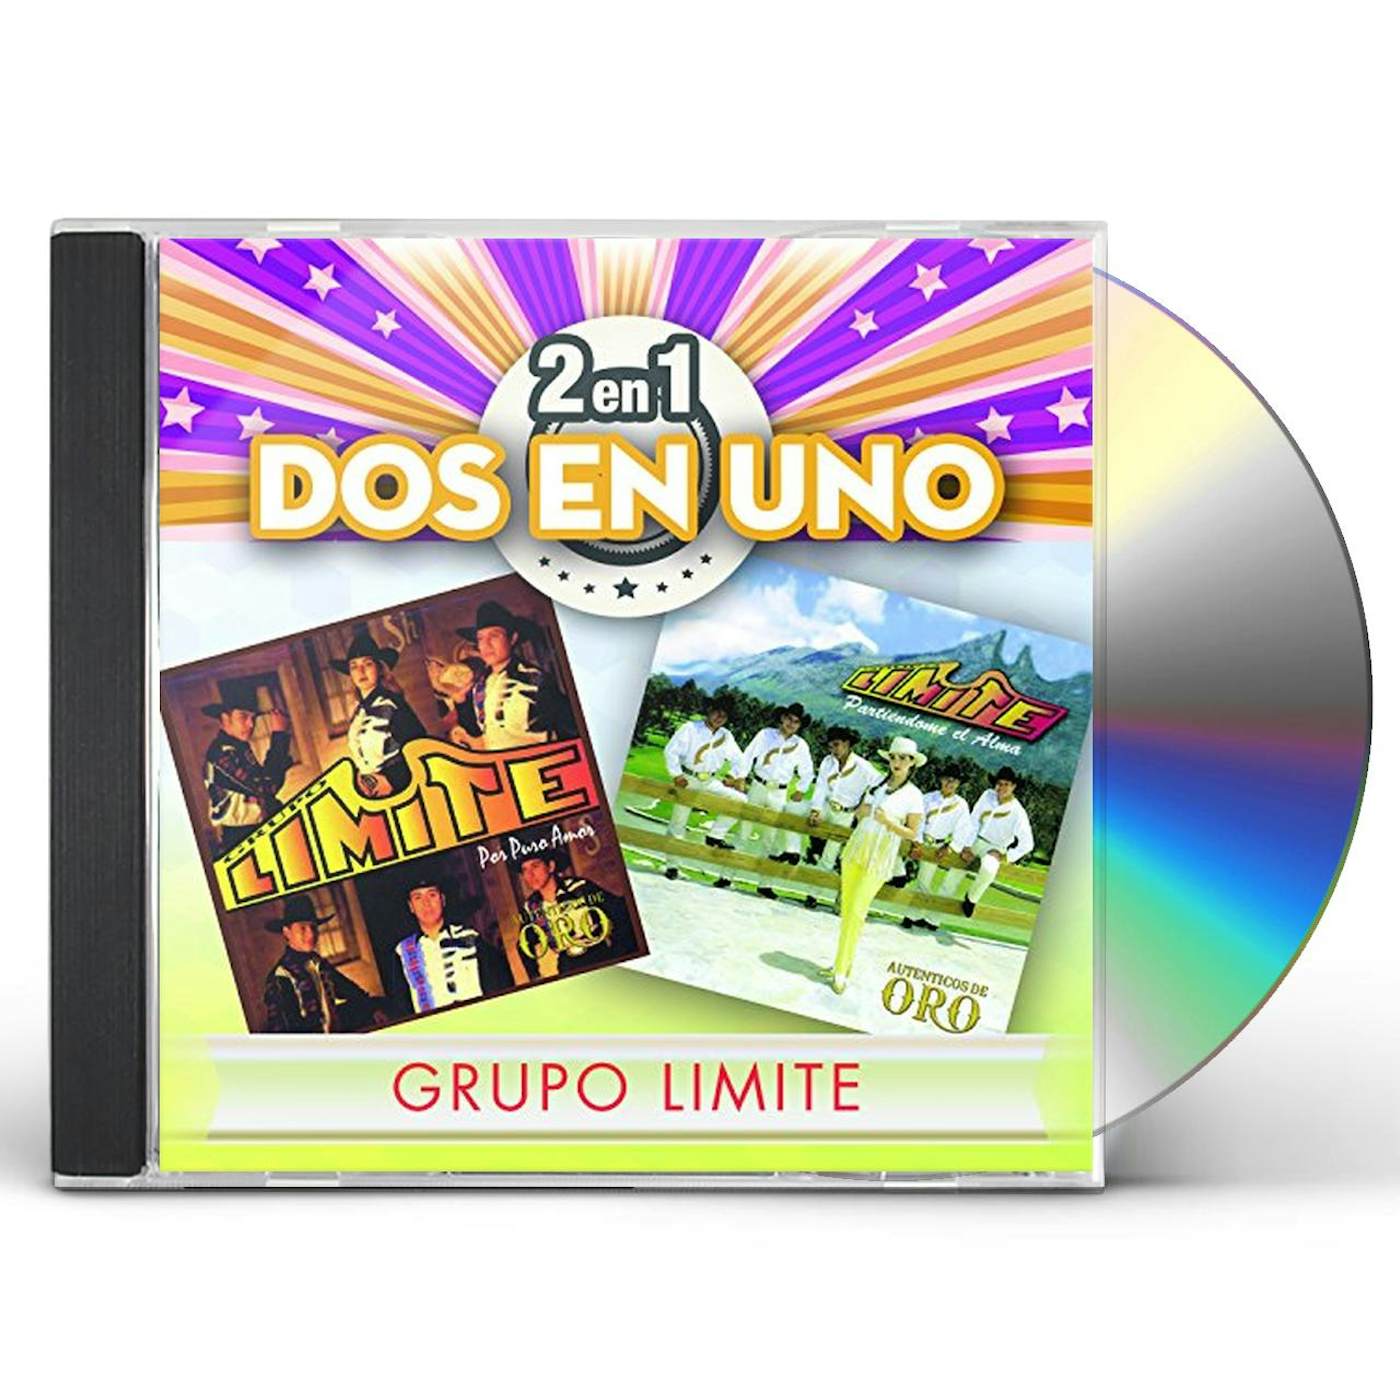 Grupo Limite: albums, songs, playlists